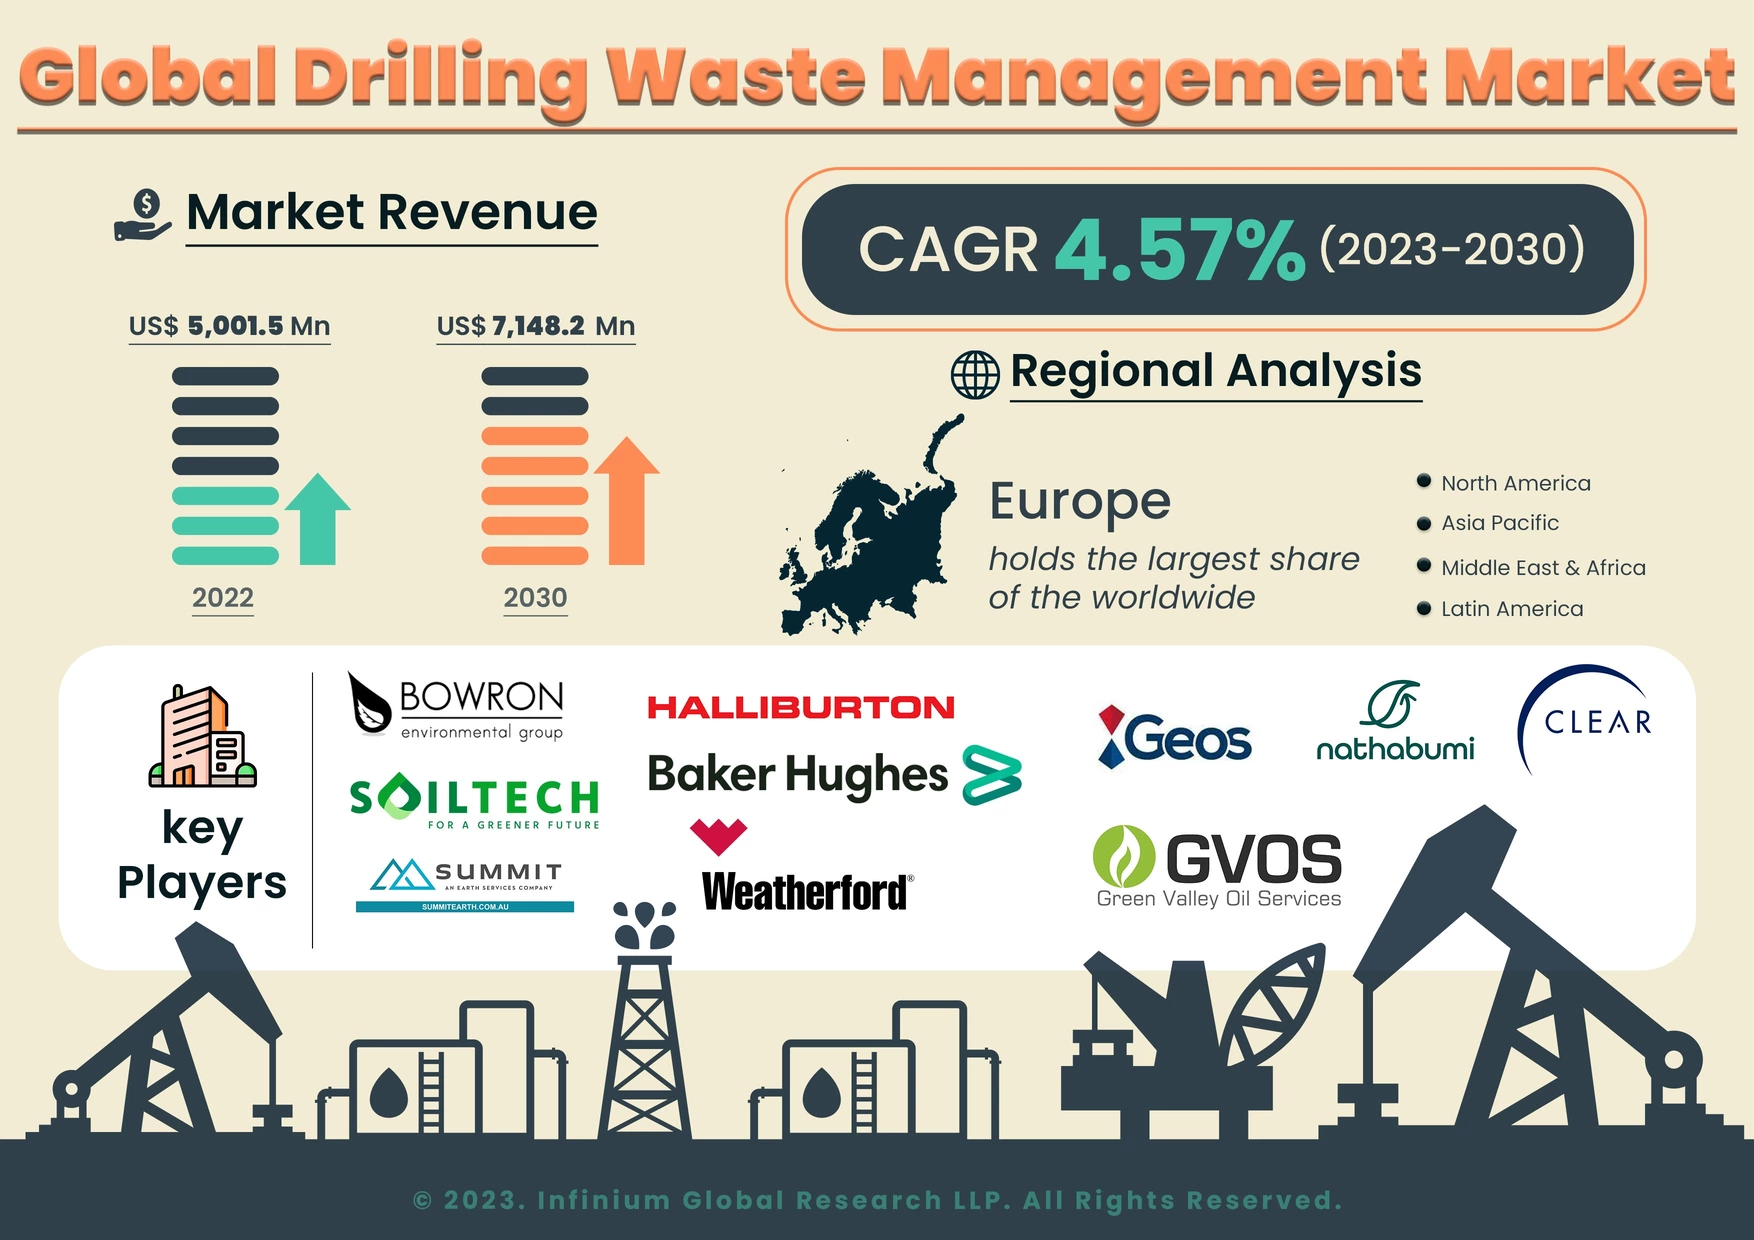 Global Drilling Waste Management Market was Valued at USD 5,001.5 Million in 2022 and is expected to reach USD 7,148.2 Million by 2030 and grow at a CAGR of 4.57% over the forecast period.